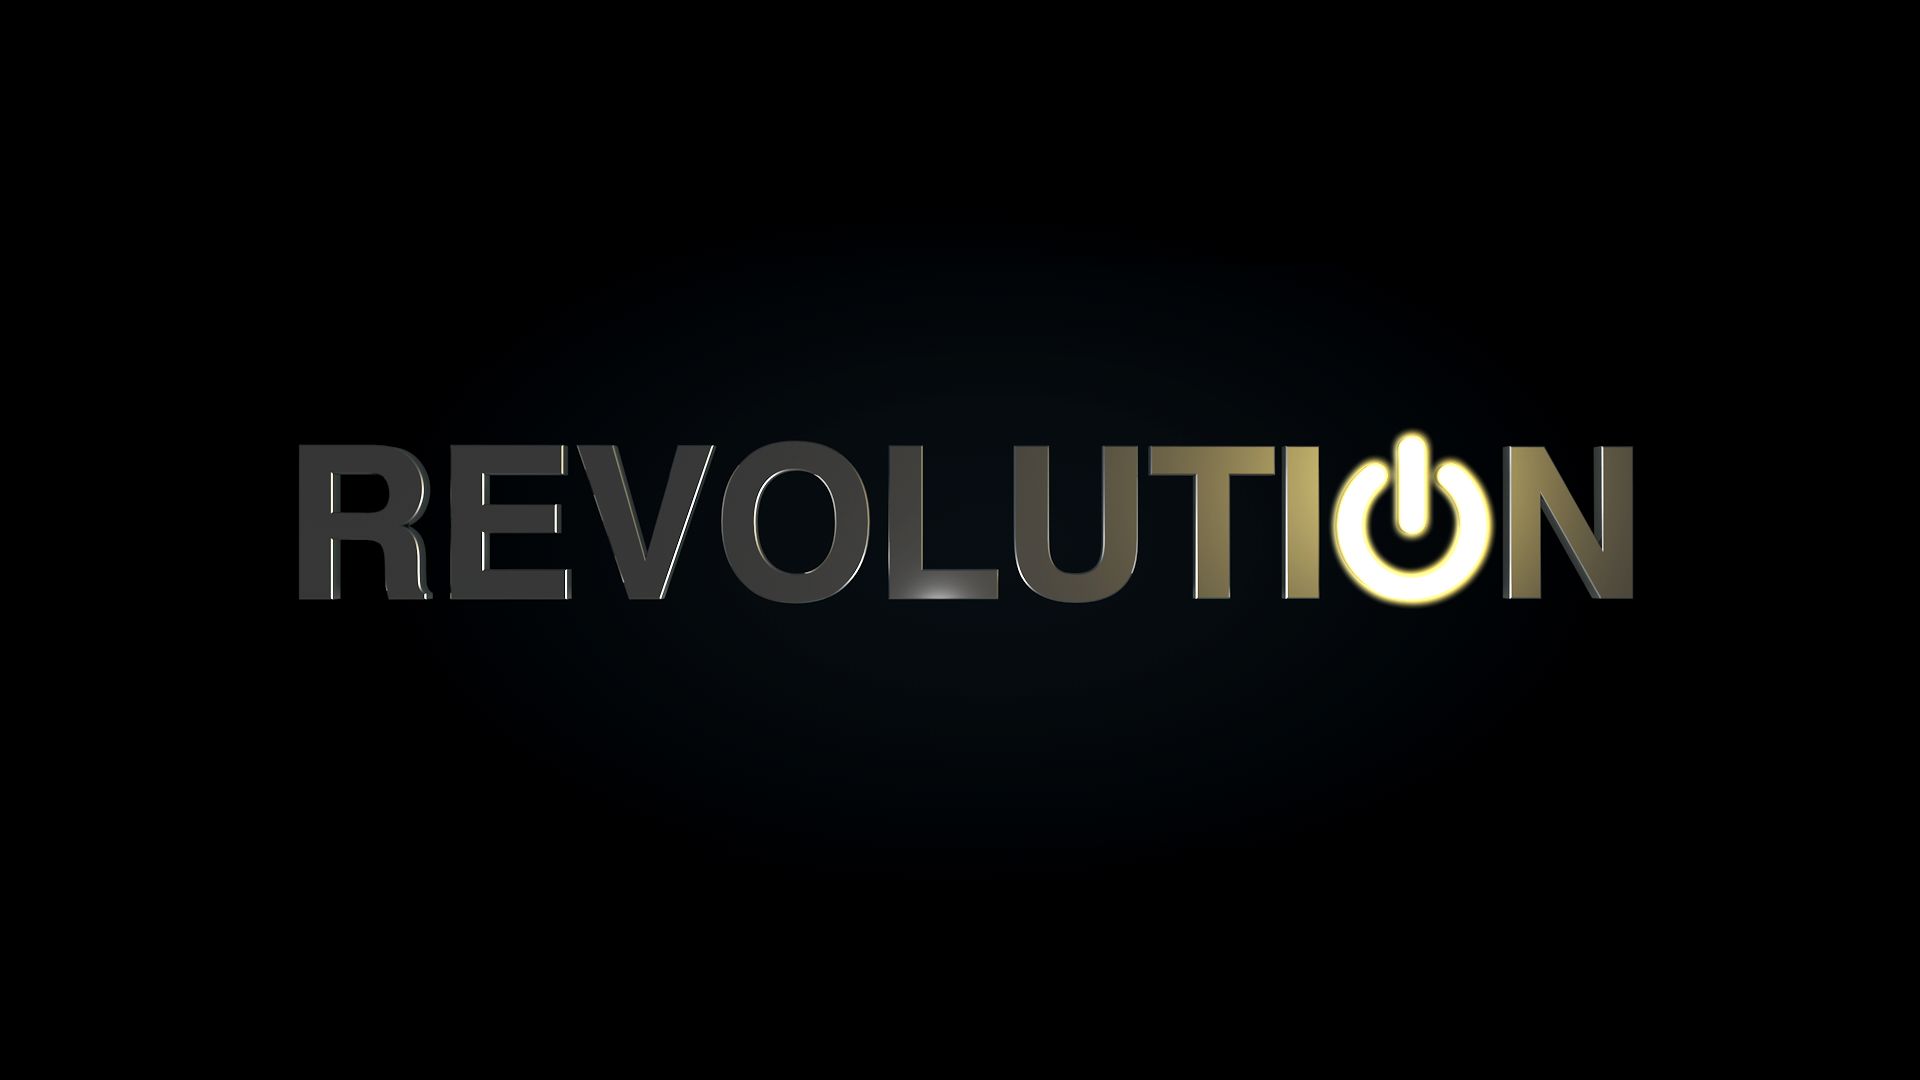 Revolution wallpapers hd, desktop backgrounds, images and pictures